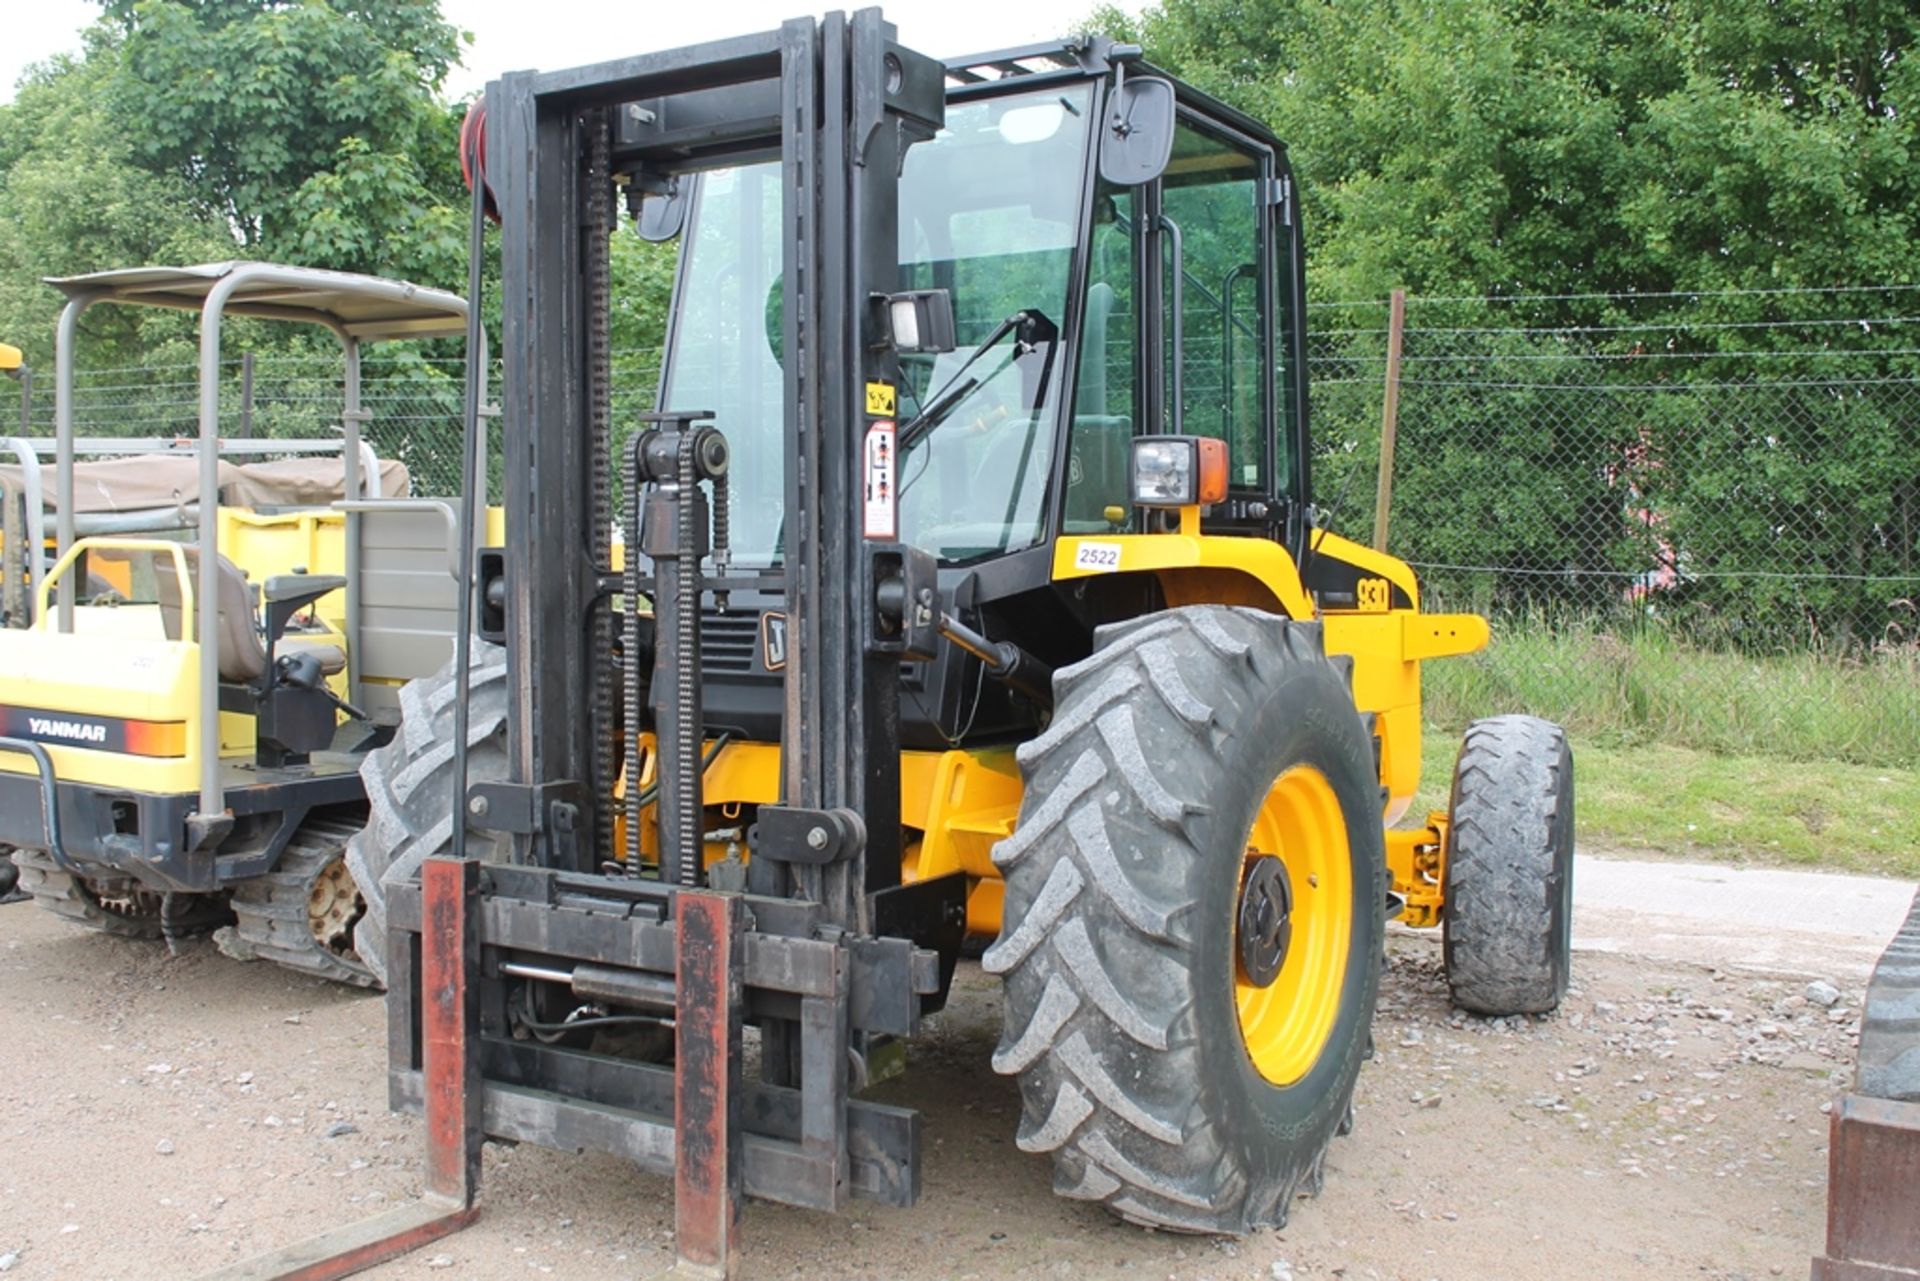 K1 SAM, , JCB 930 4WD, , 18, 143 HOURS - UNCHECKED, , YEAR 2003, , PLUS VAT,